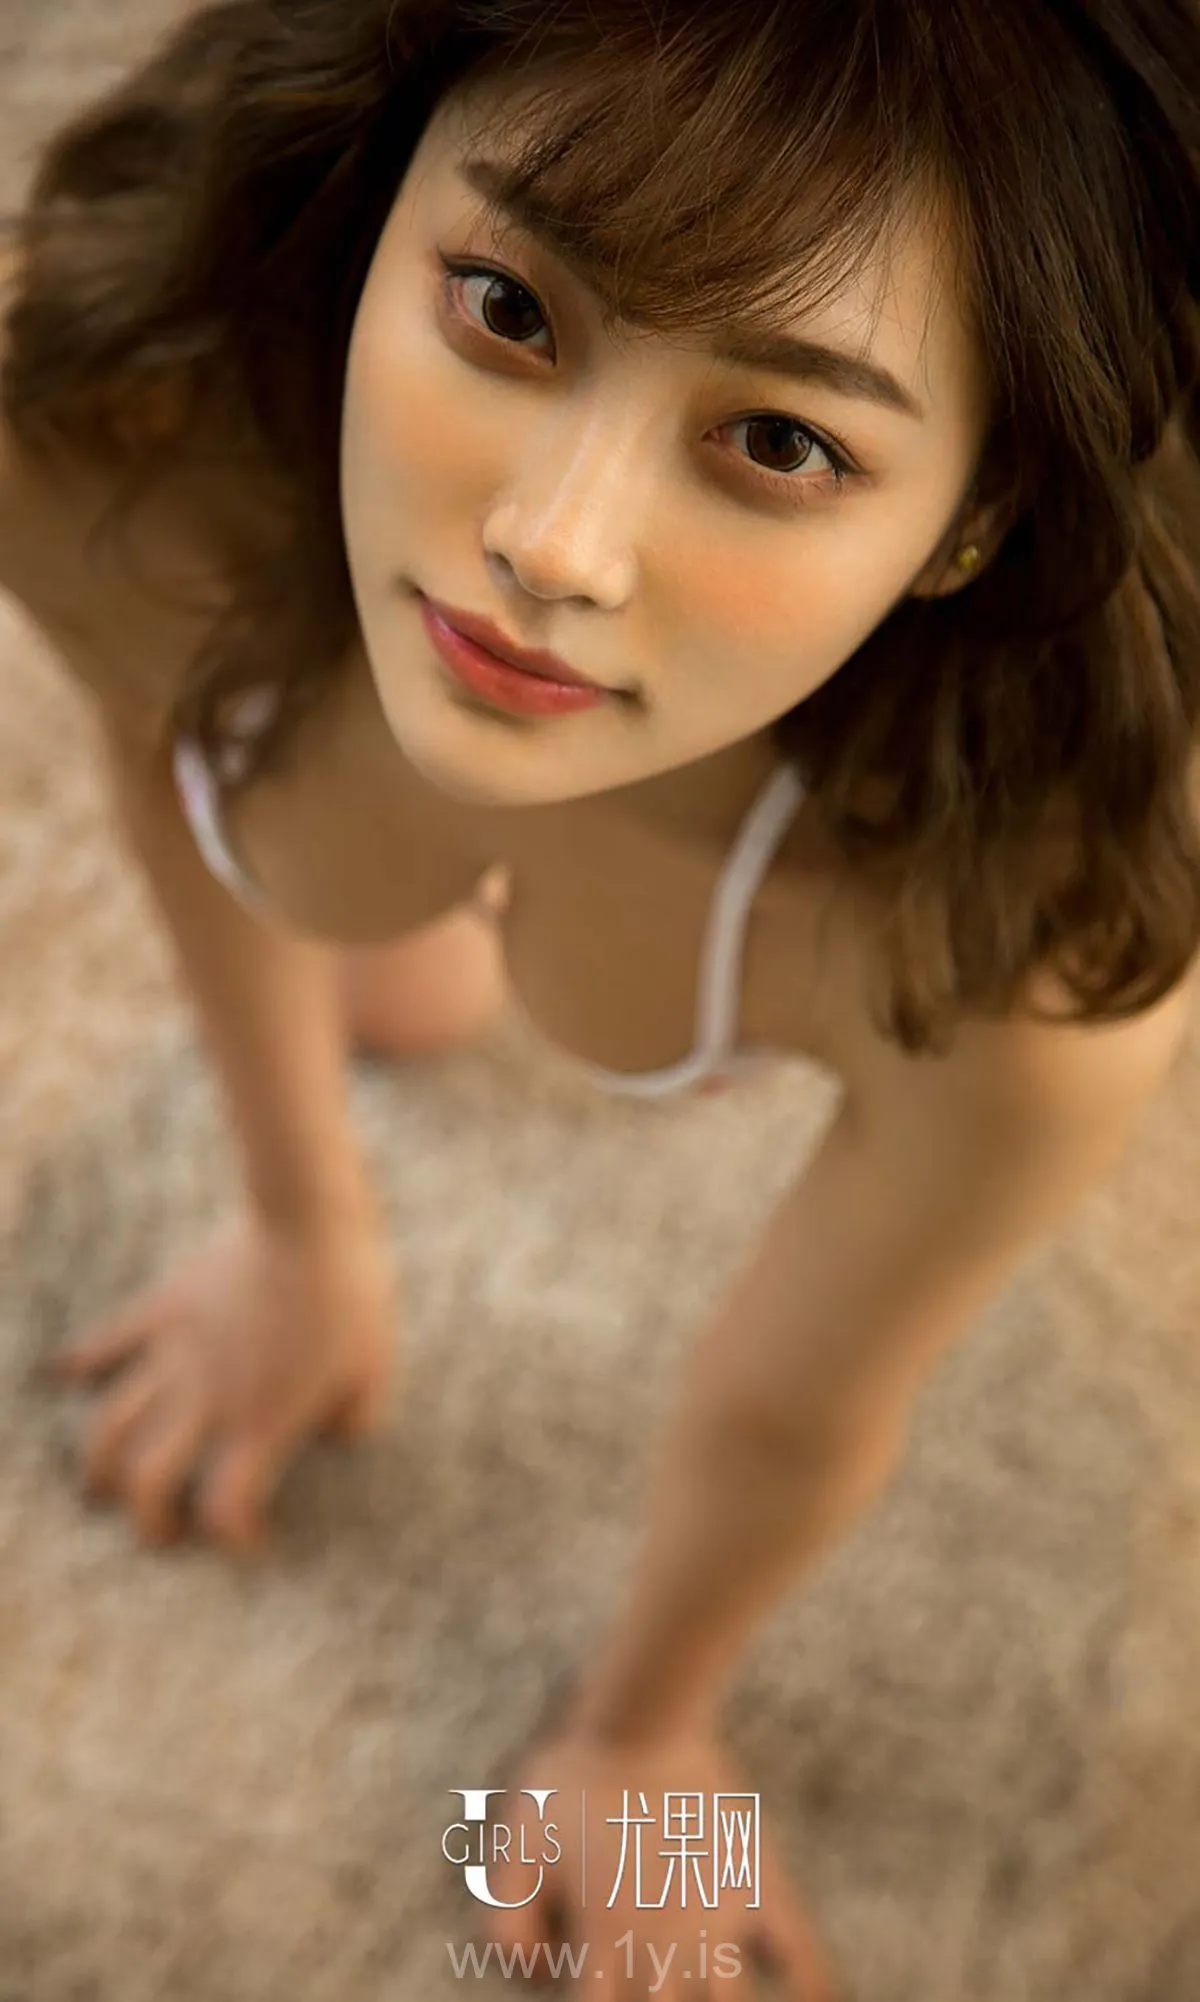 UGIRLS NO.535 Adorable Chinese Women 杨晨晨_晨间雨露